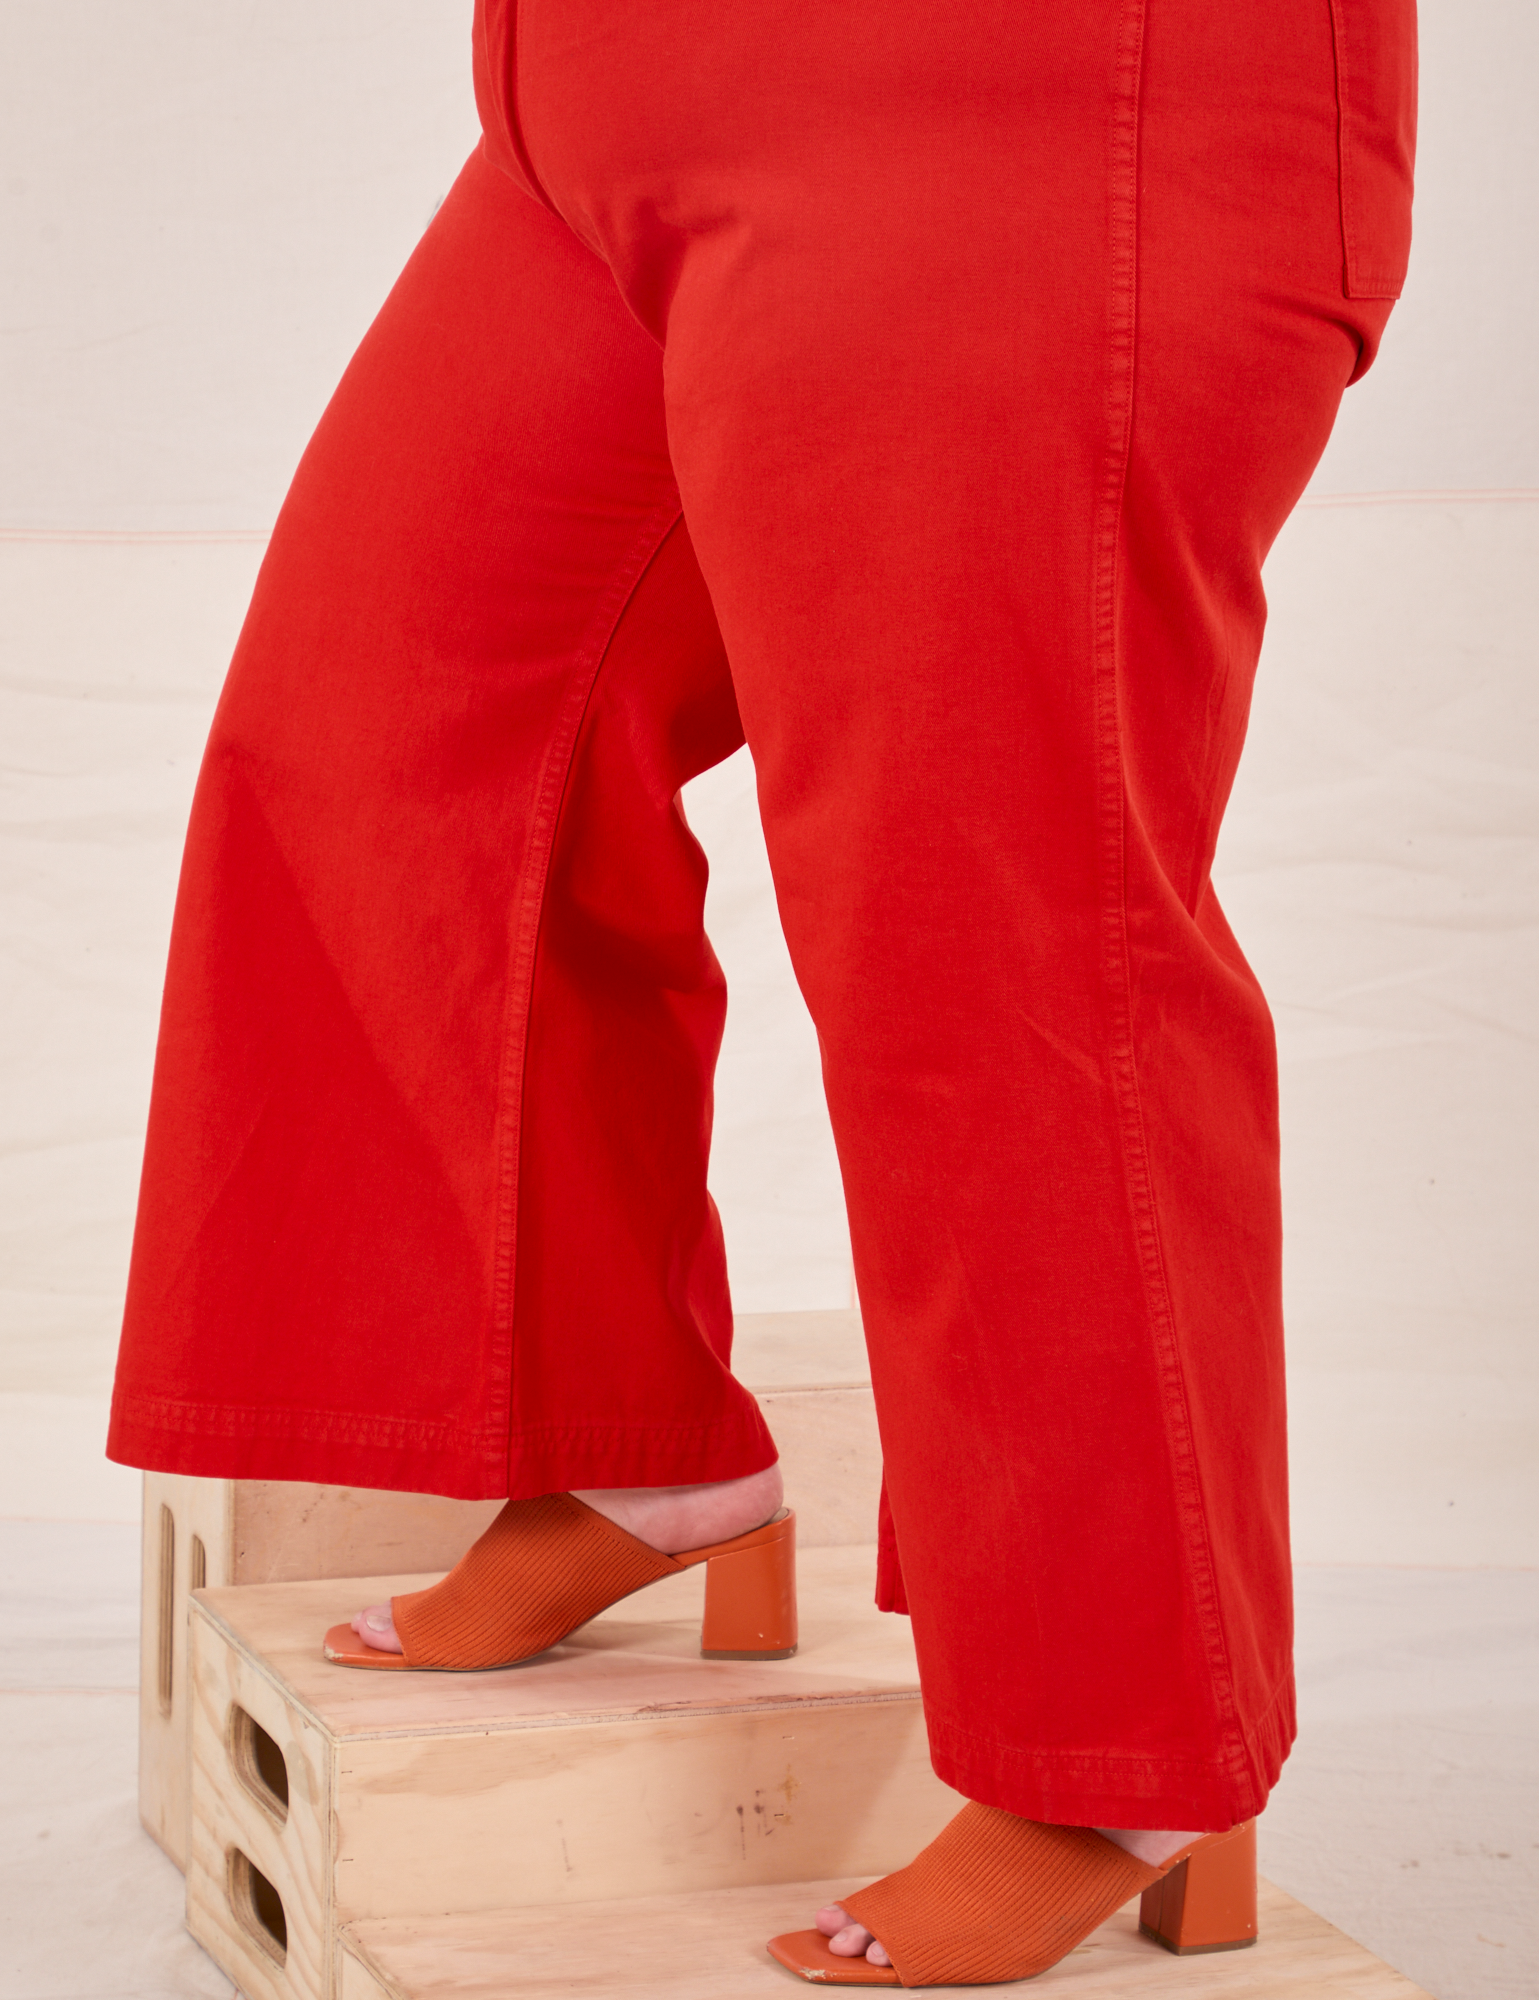 Bell Bottoms in Mustang Red pant leg side view close up on Marielena